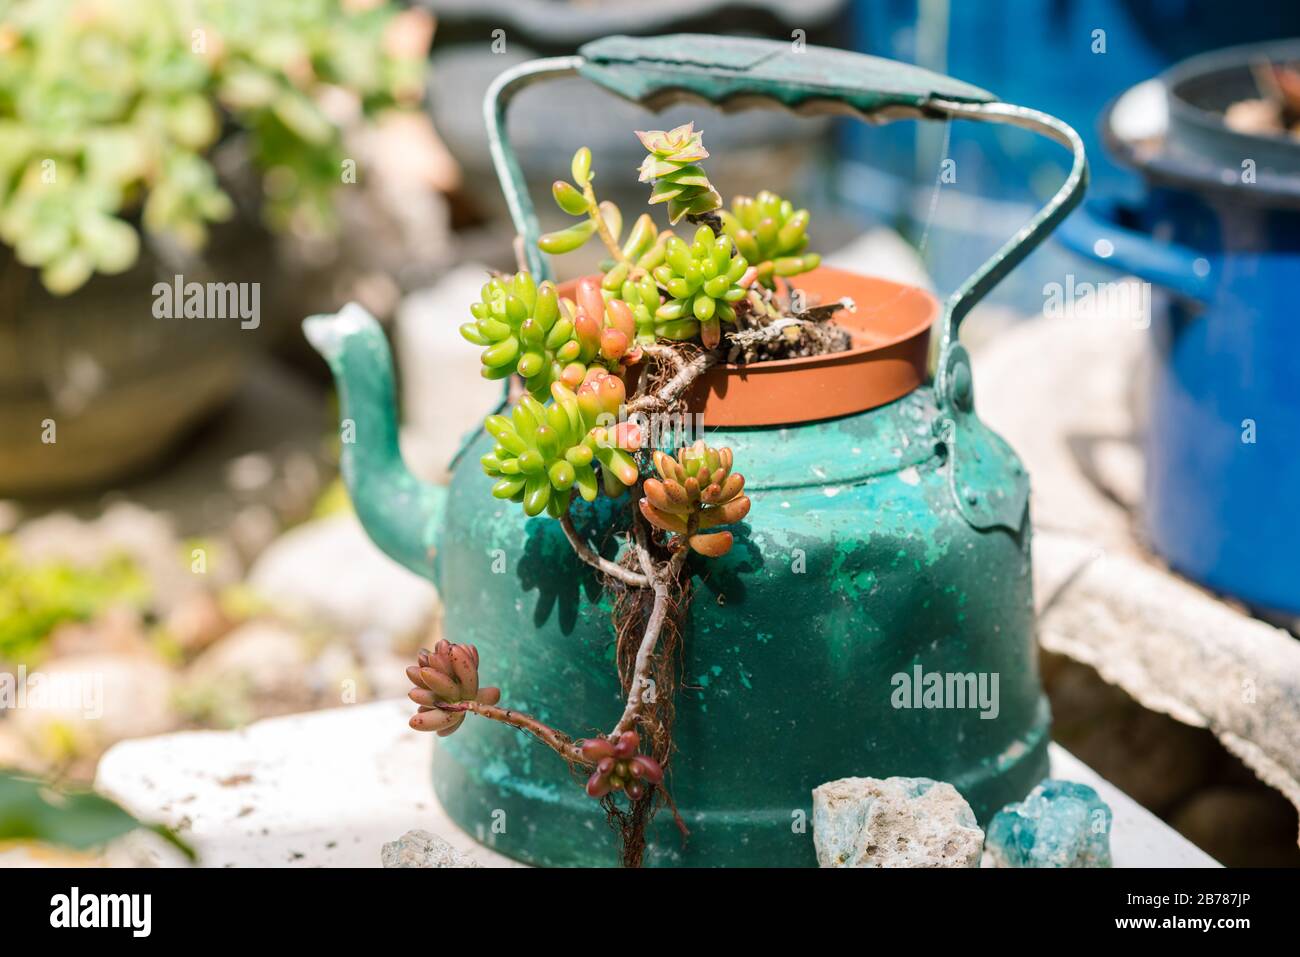 Reused planter ideas. Second-hand kettles, saucepans, old teapots turn into garden flower pots. Recycled garden design and low-waste lifestyle. Stock Photo